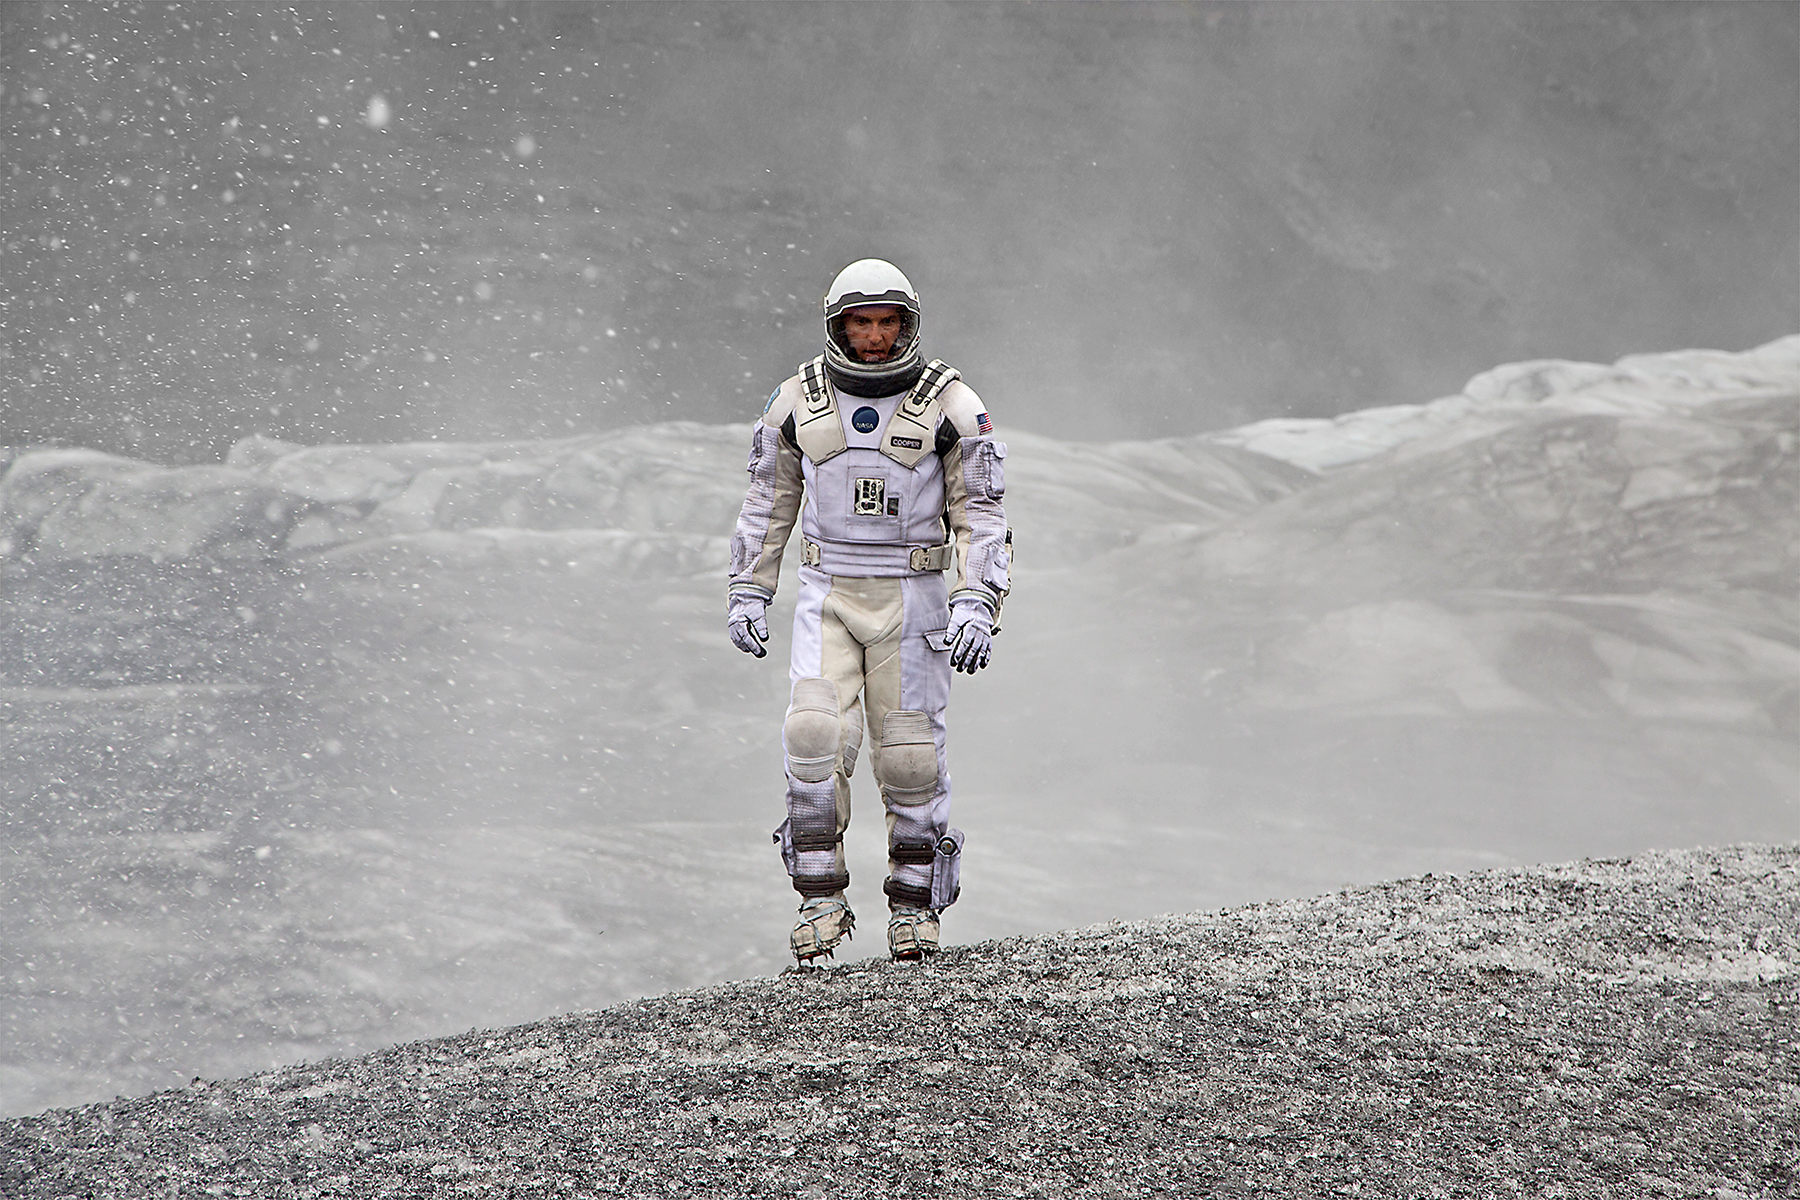 Interstellar is available for streaming on Amazon Prime Video